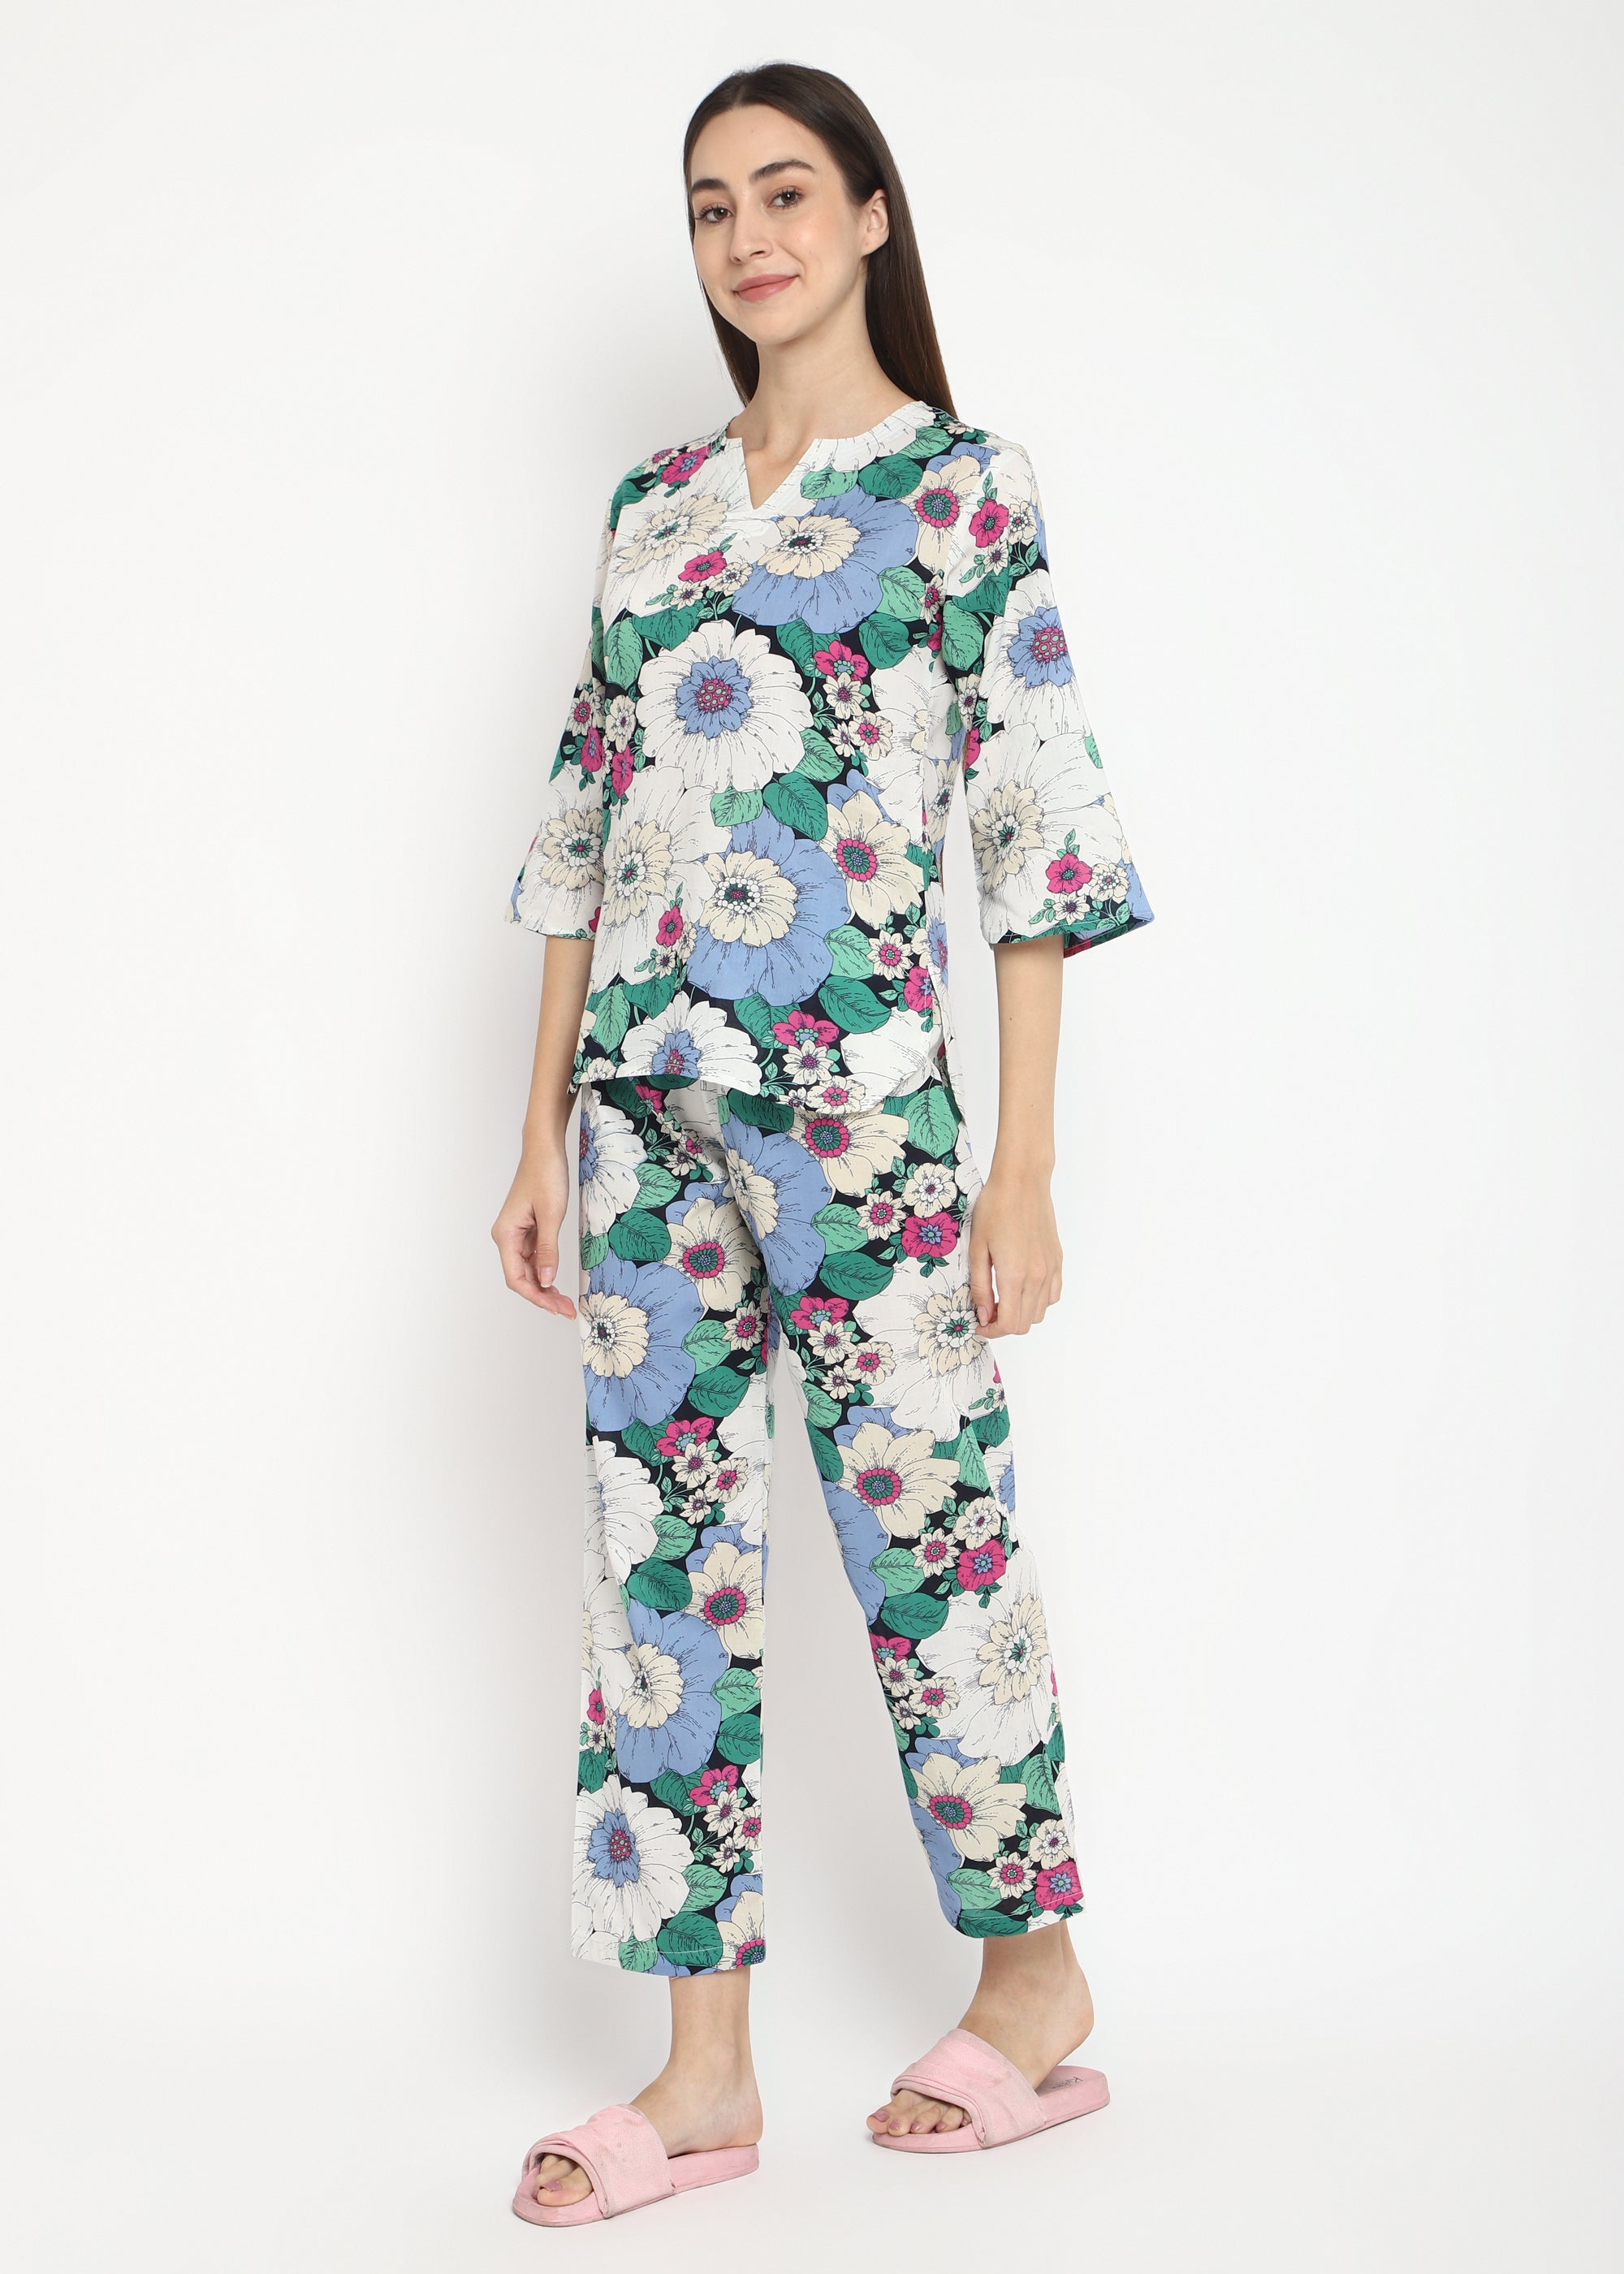 Colorful Flowers Blue and Green V Neck Women's Night Suit